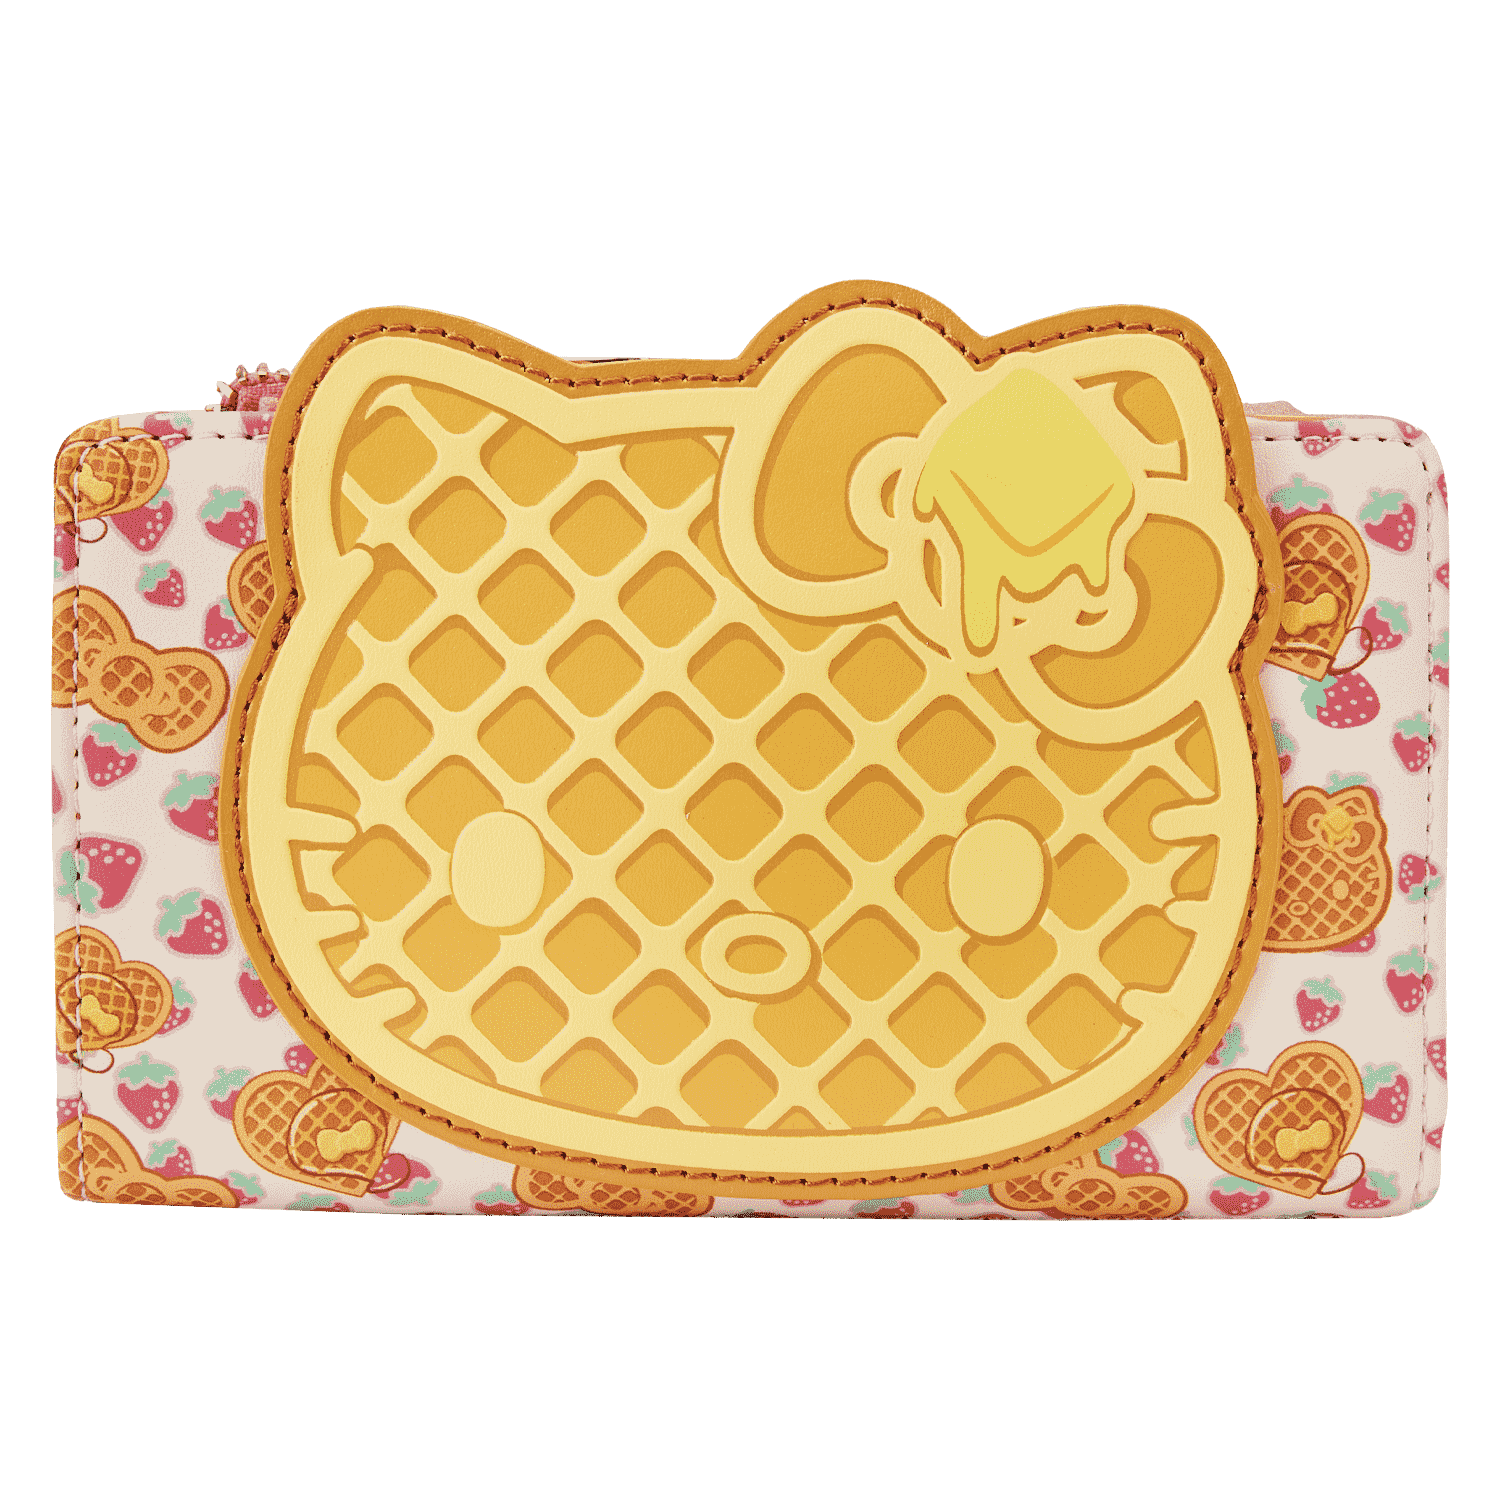 Loungefly Hello Kitty Cupcake Flap Wallet